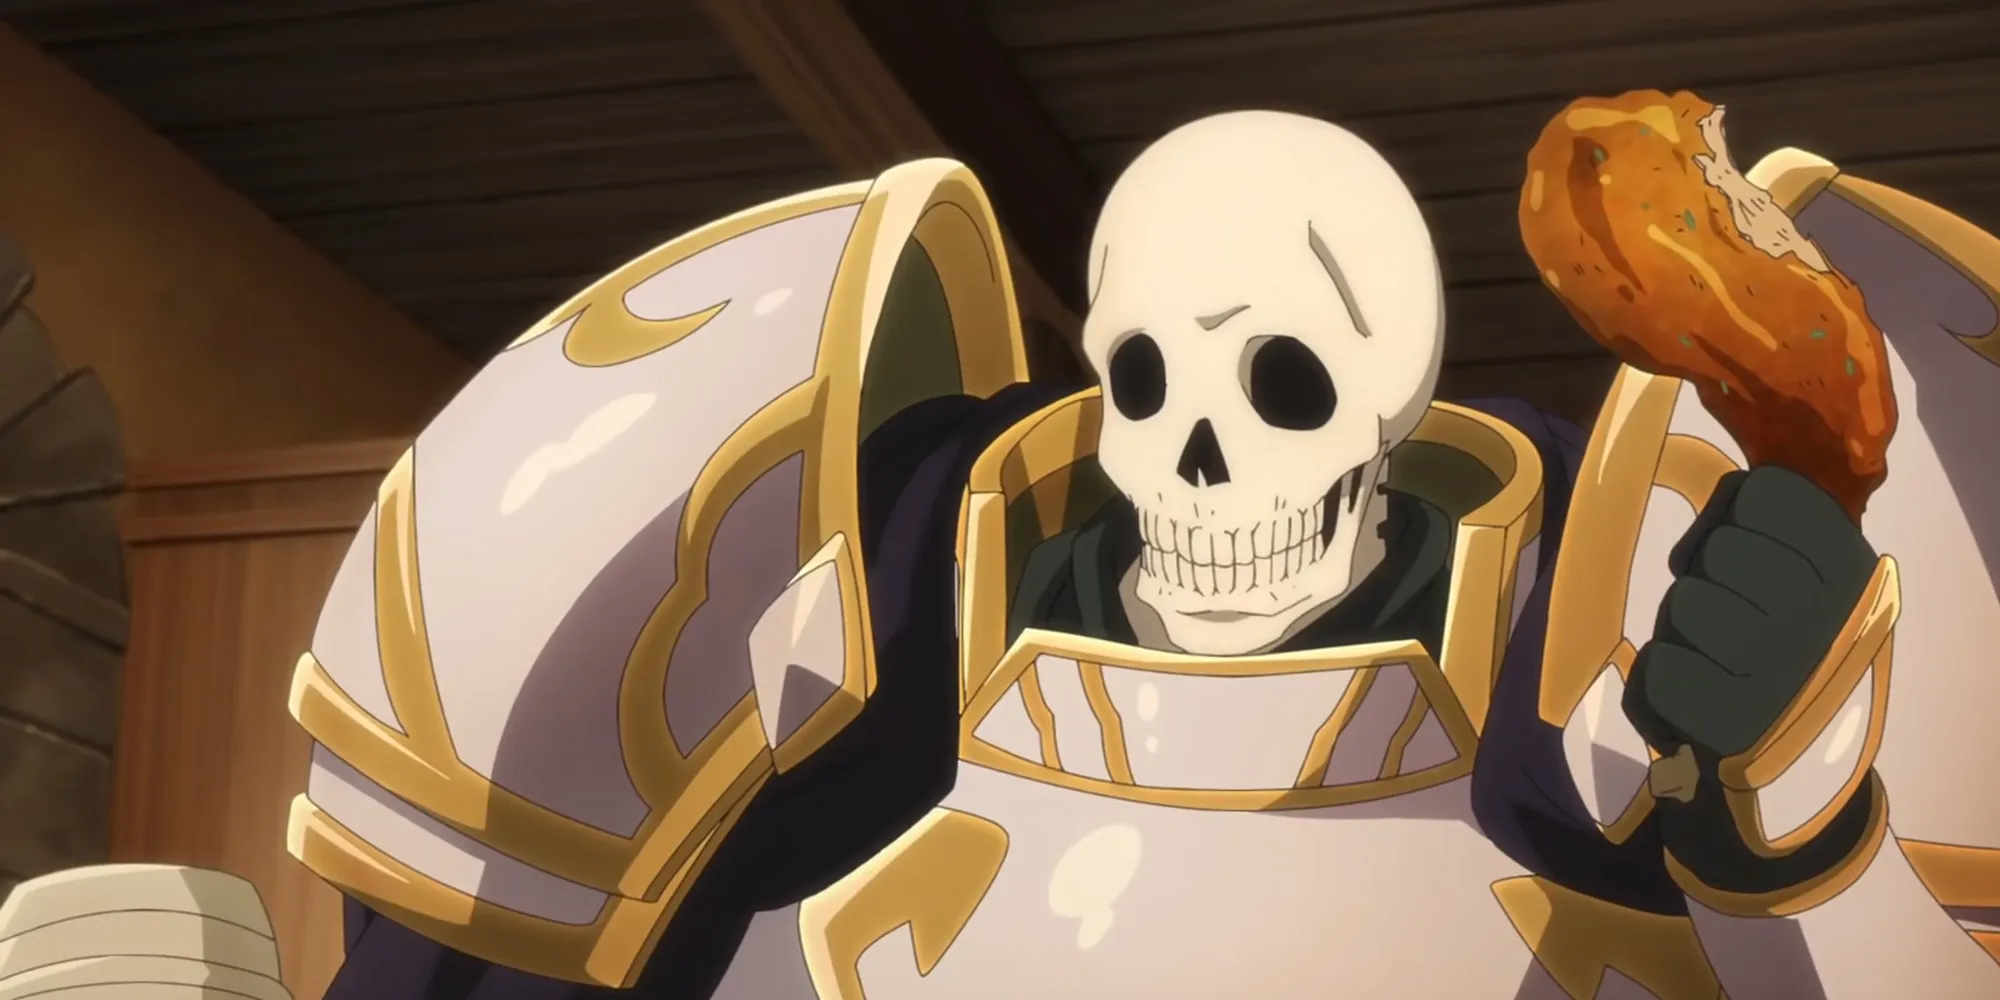 Arc Skeleton Knight in Another World